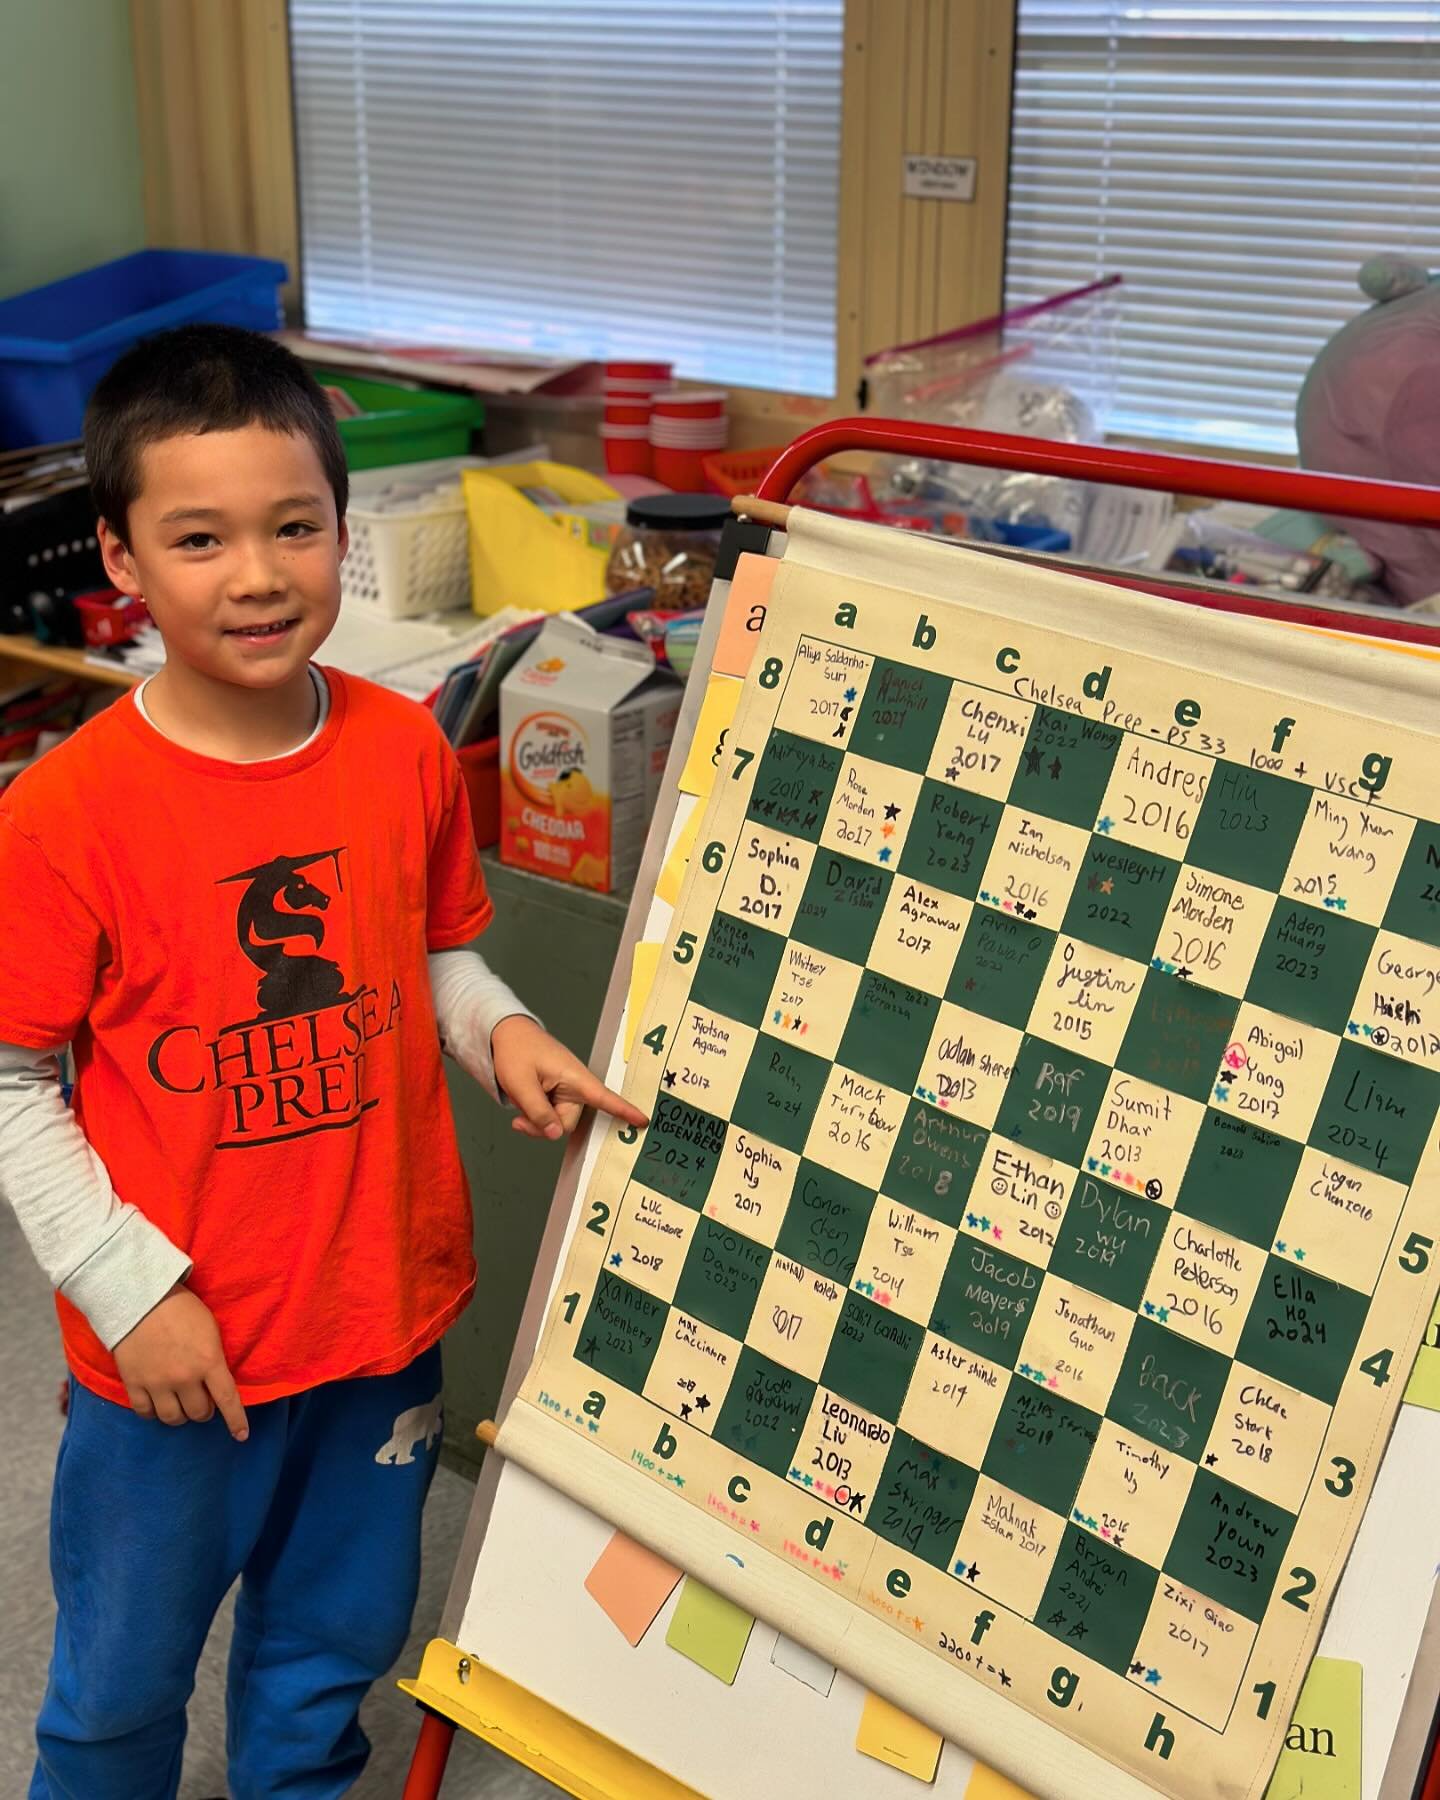 Big Shoutout to Conrad on breaking 1000! He closes out the first ever Hall of Fame Board! 64 legends 1 board 1 School. Absolute legend! #ps33chess #chelseaprepchess #legendsoftomorrow #halloffameday #1000plususcf